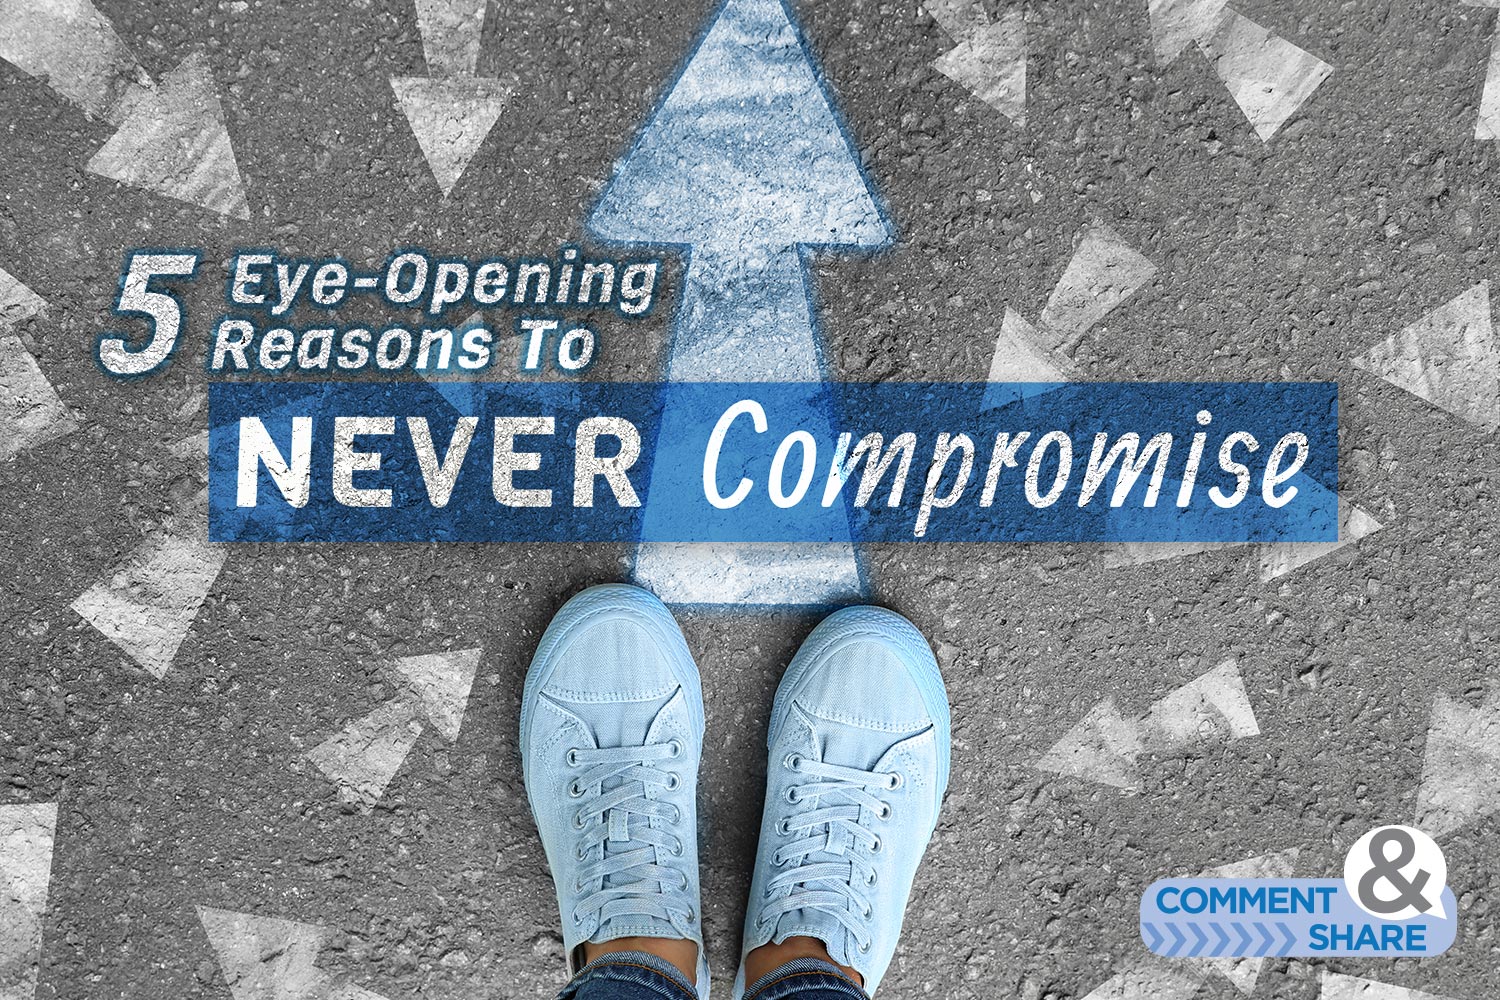 5 Eye-Opening Reasons to Never Compromise